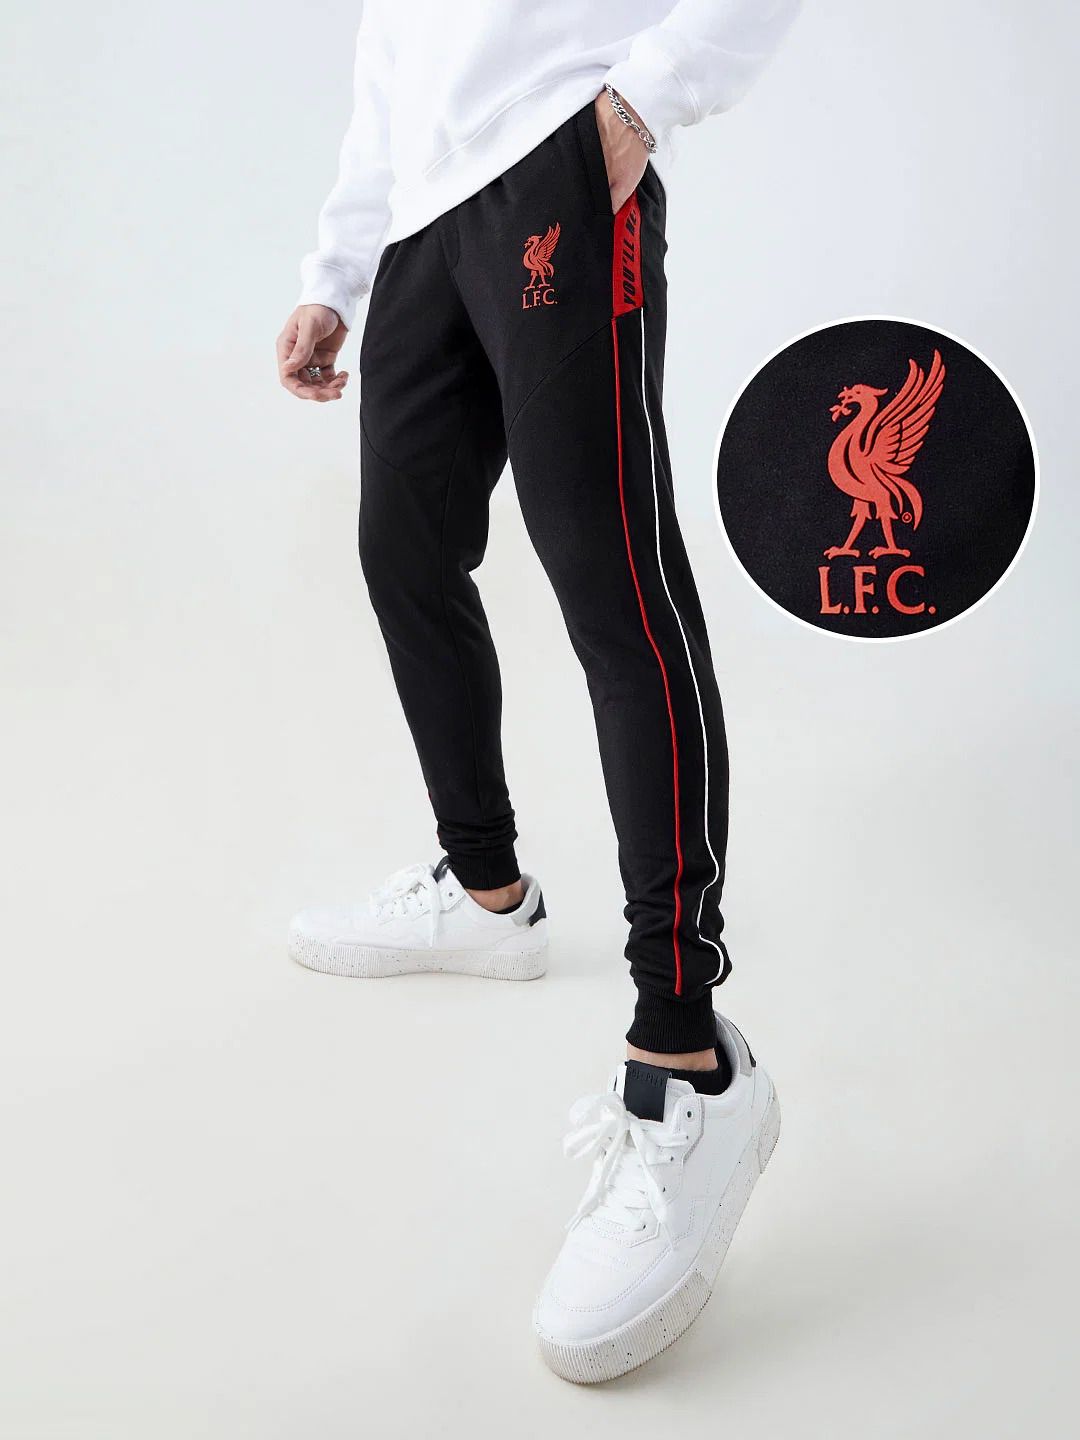 Buy Men Black and Red Printed Cotton Regular Fit Joggers From Fancode Shop